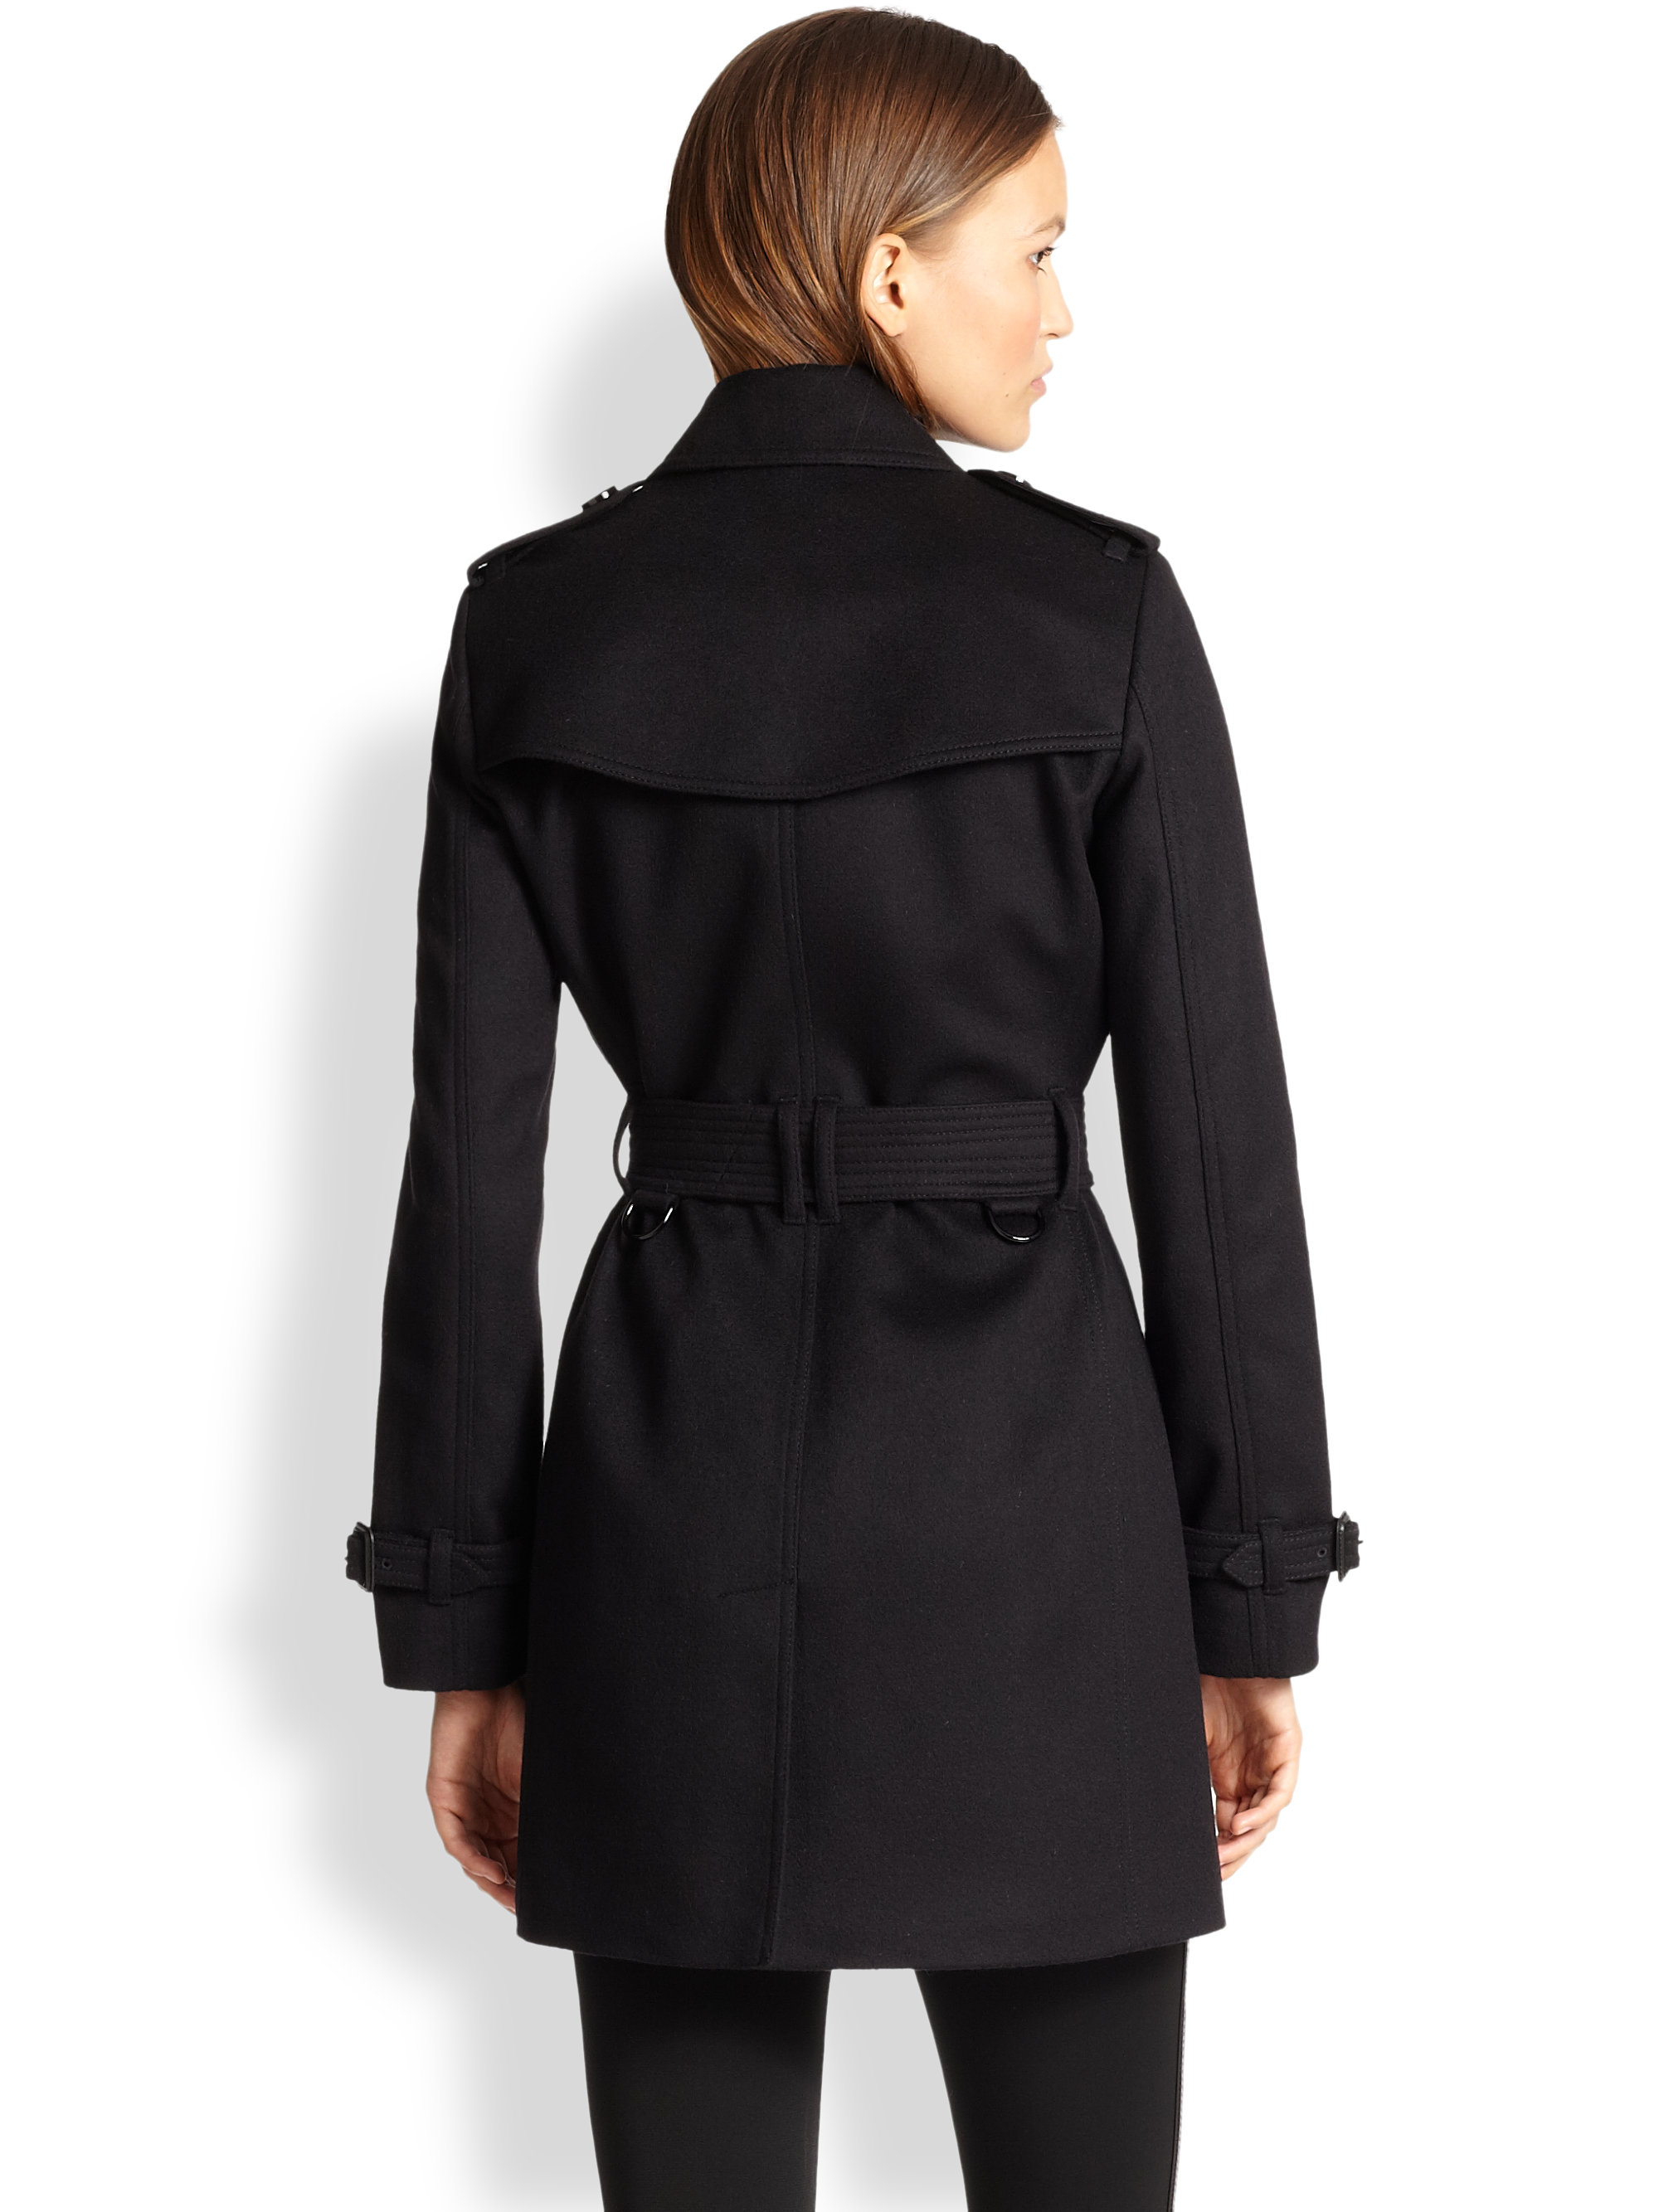 Burberry Kensington Wool & Cashmere Trench Coat in Black | Lyst